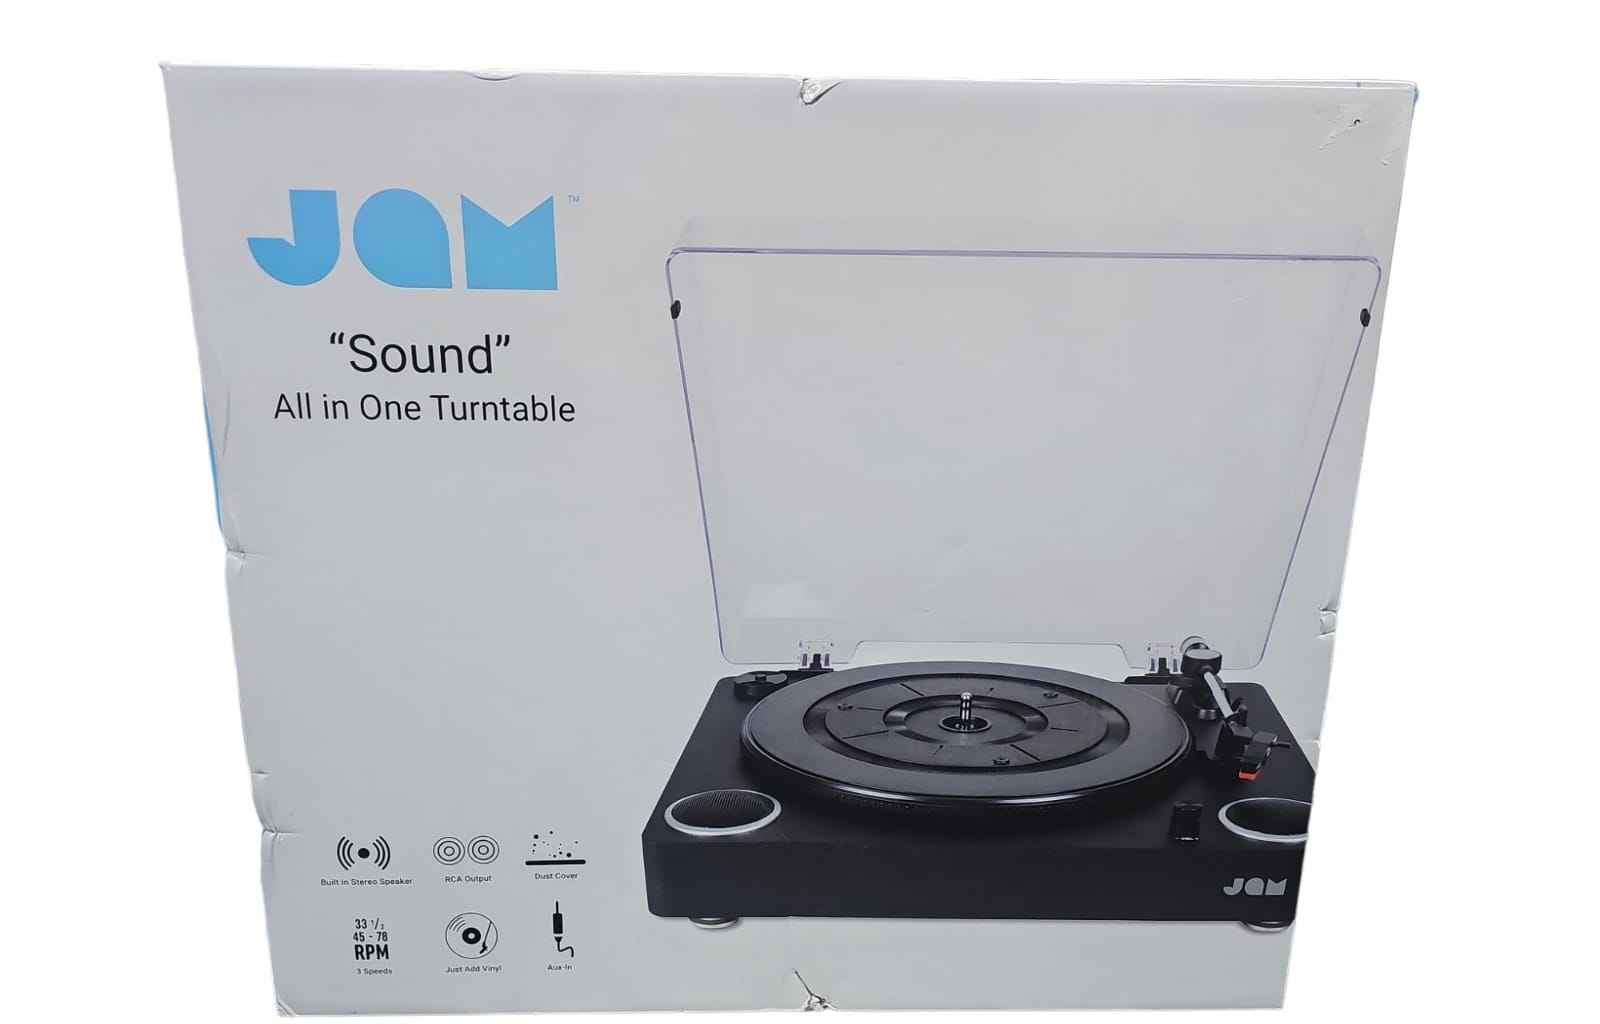 Jam sound all in one turntable